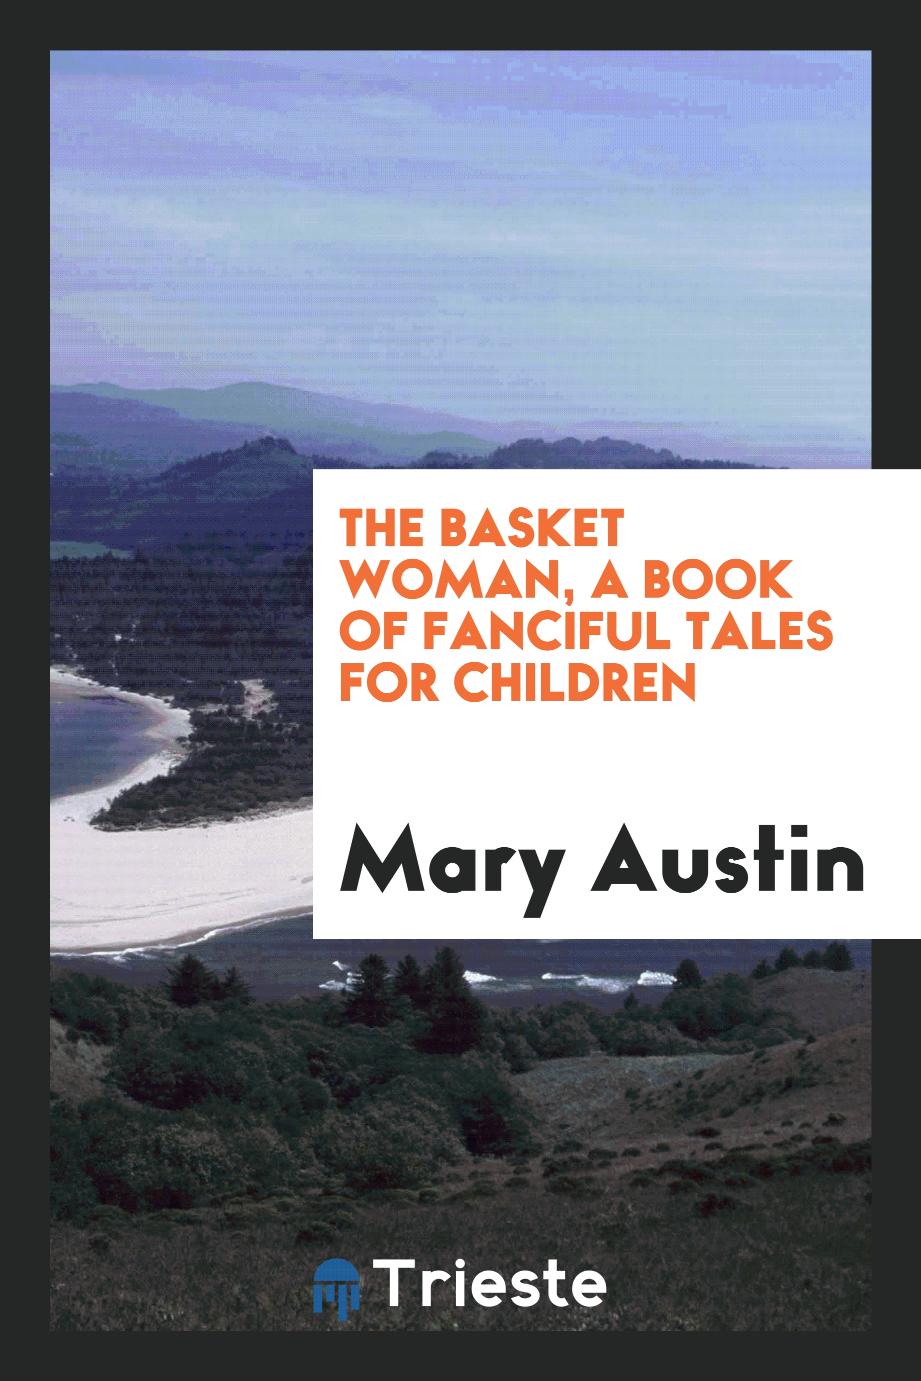 The basket woman, a book of fanciful tales for children